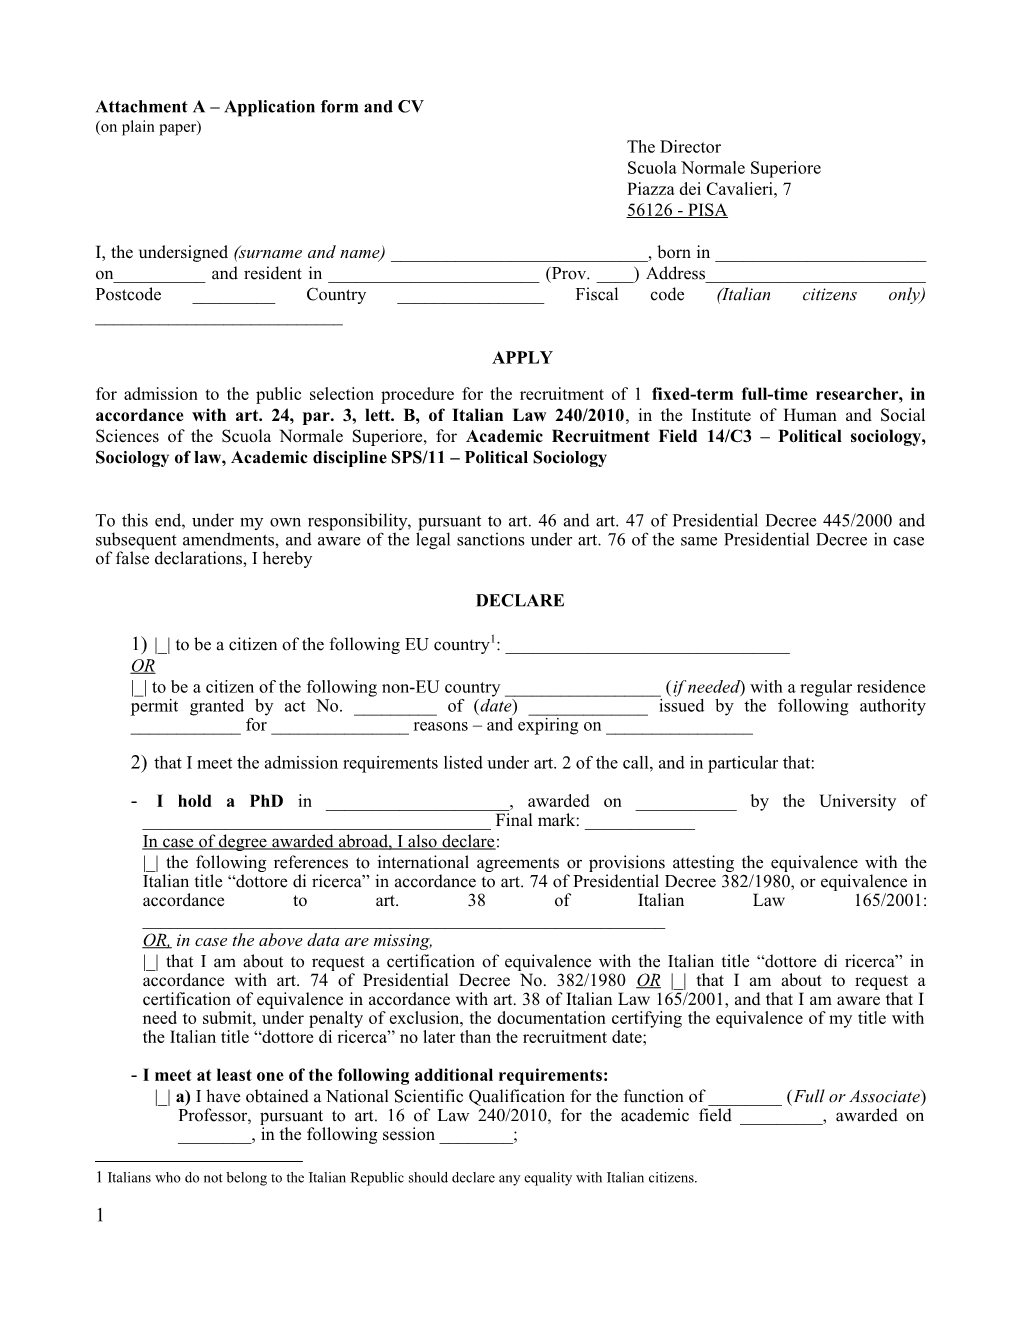 Attachment a Application Form and CV